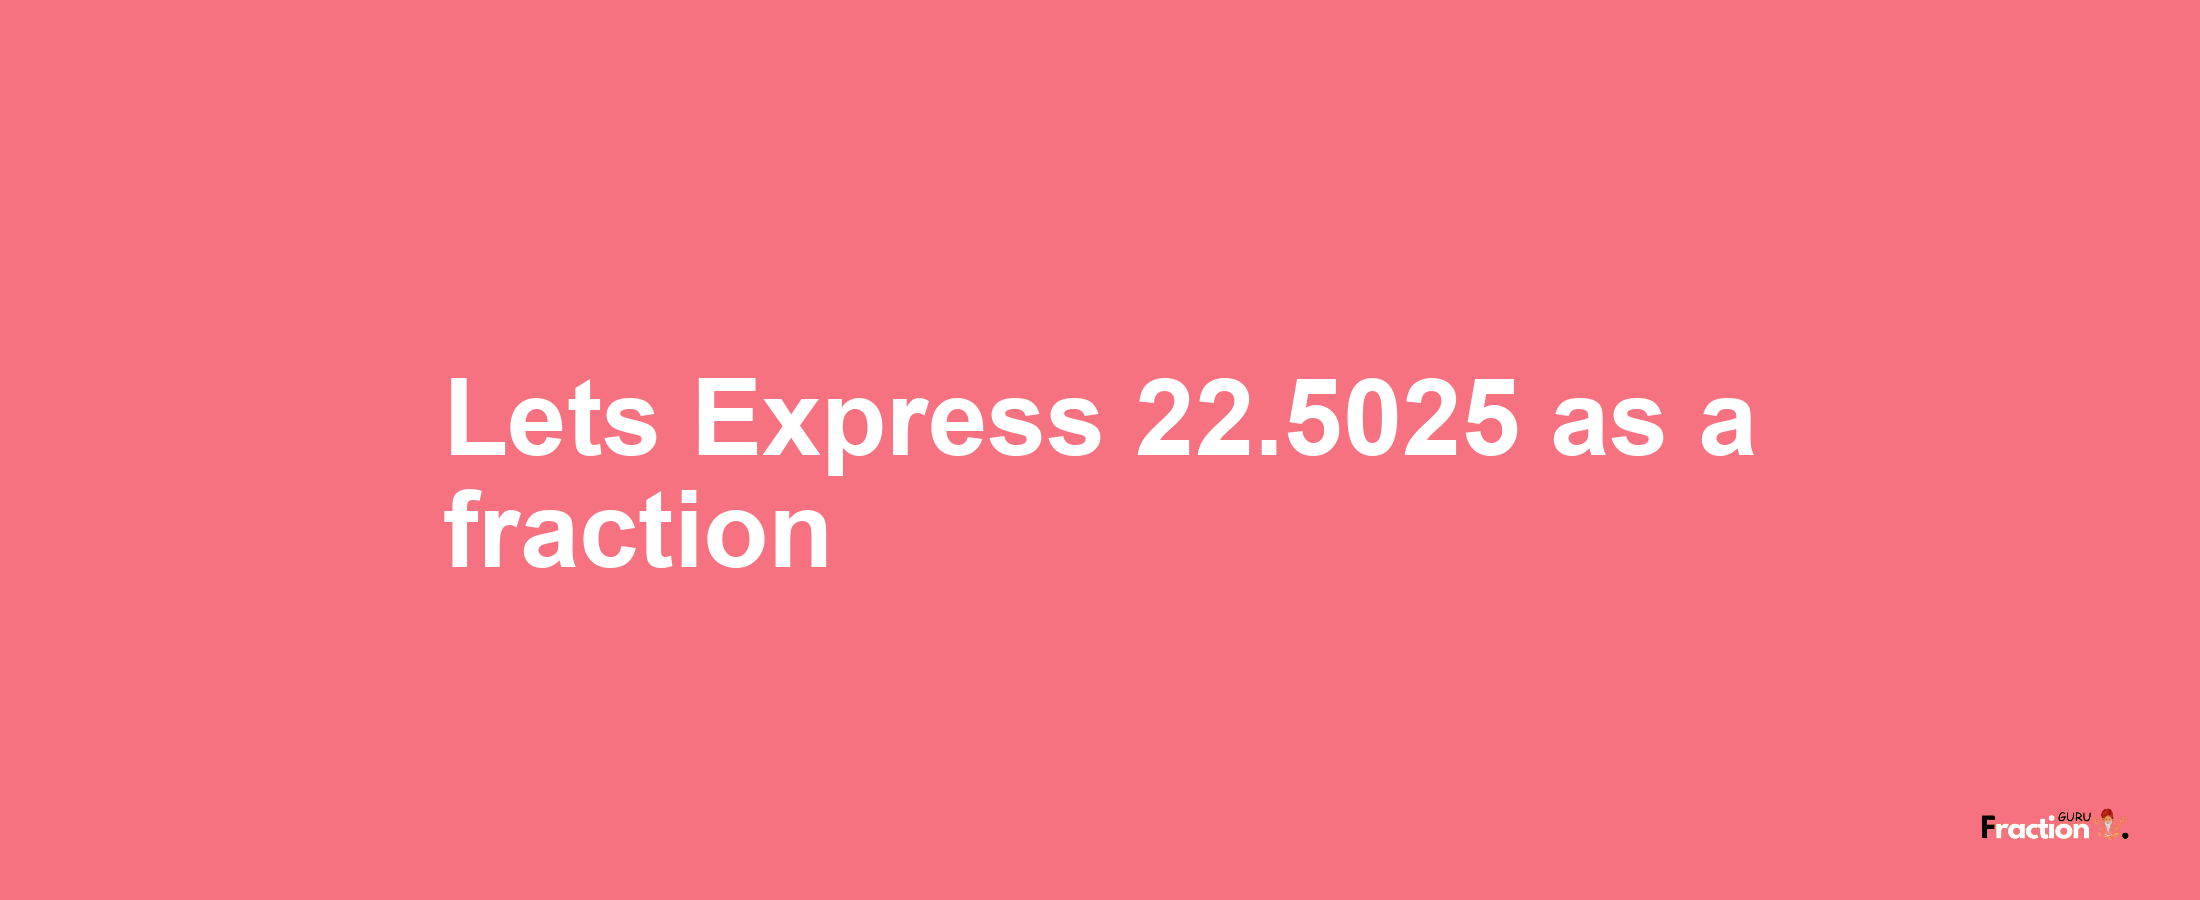 Lets Express 22.5025 as afraction